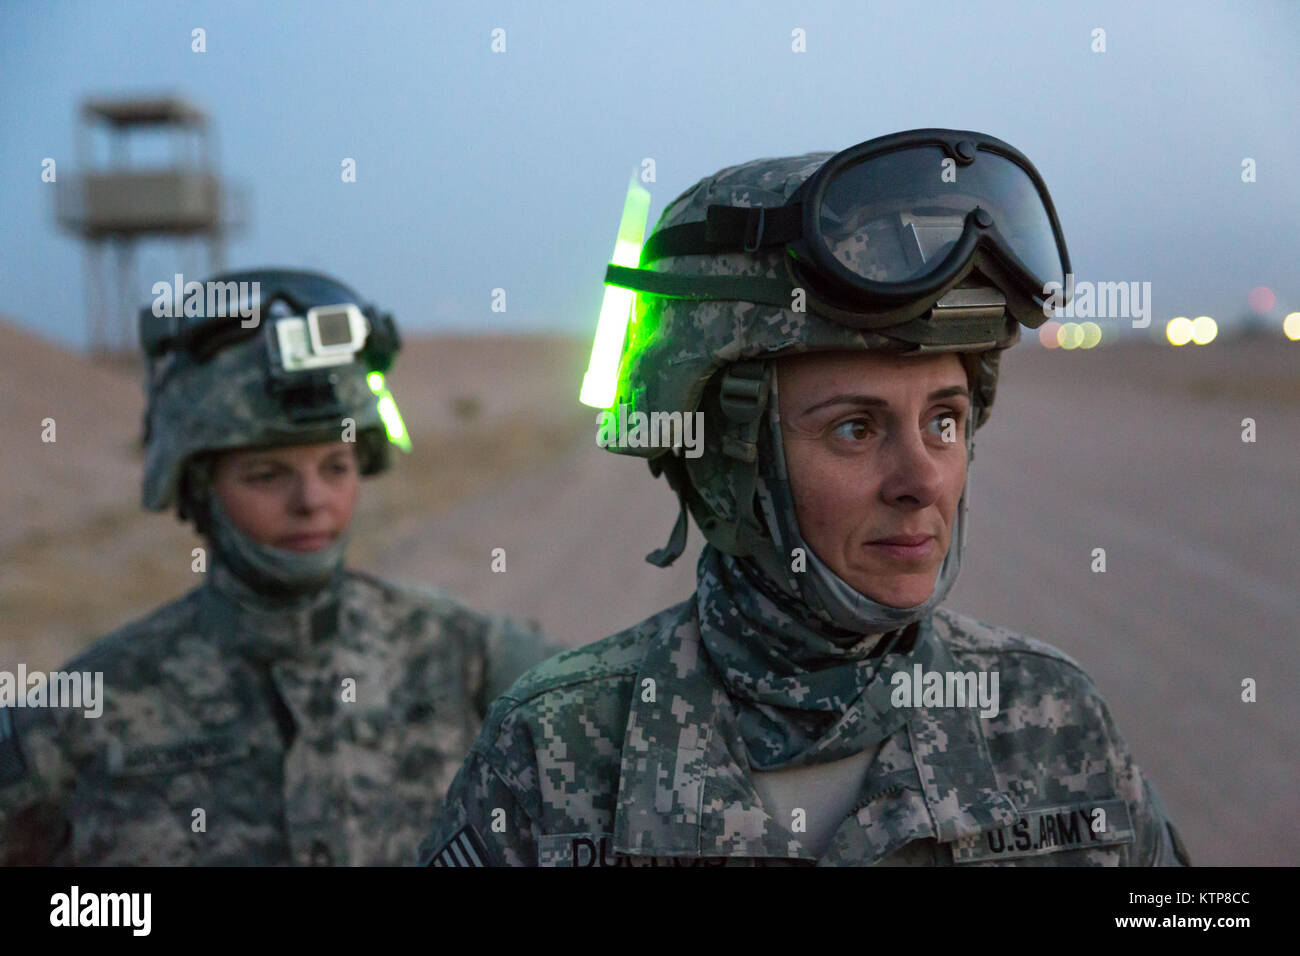 Sgt. First Class Joann Duclose (front), a senior human resources sergeant, and Master Sgt. Cindy Marcinkowski, the operations NCOIC, both from the 642nd Aviation Support Battalion, wait for nightfall before starting sling load training with aviators from 3rd Battalion, 142nd Assault Helicopter Battalion, on June 5, 2014, in Camp Buehring, Kuwait.  The 642nd and 142nd, both under the 42nd Combat Aviation Brigade, New York Army National Guard, are deployed to Kuwait in support of Operation Enduring Freedom. (N.Y. Army National Guard photo by Sgt. Harley Jelis/Released) Stock Photo